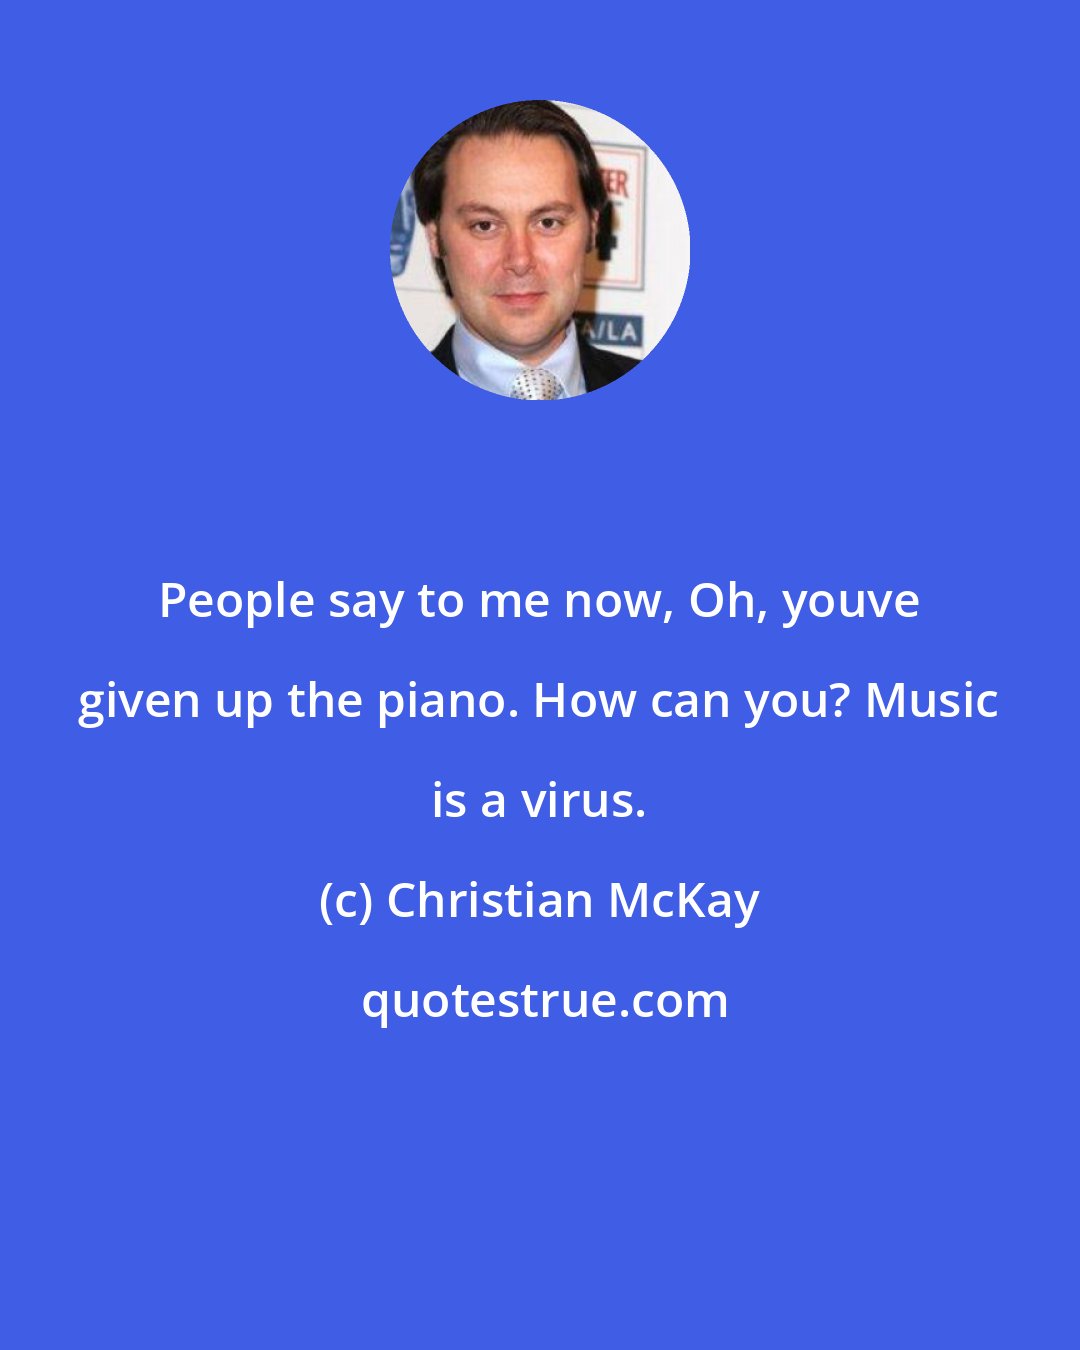 Christian McKay: People say to me now, Oh, youve given up the piano. How can you? Music is a virus.